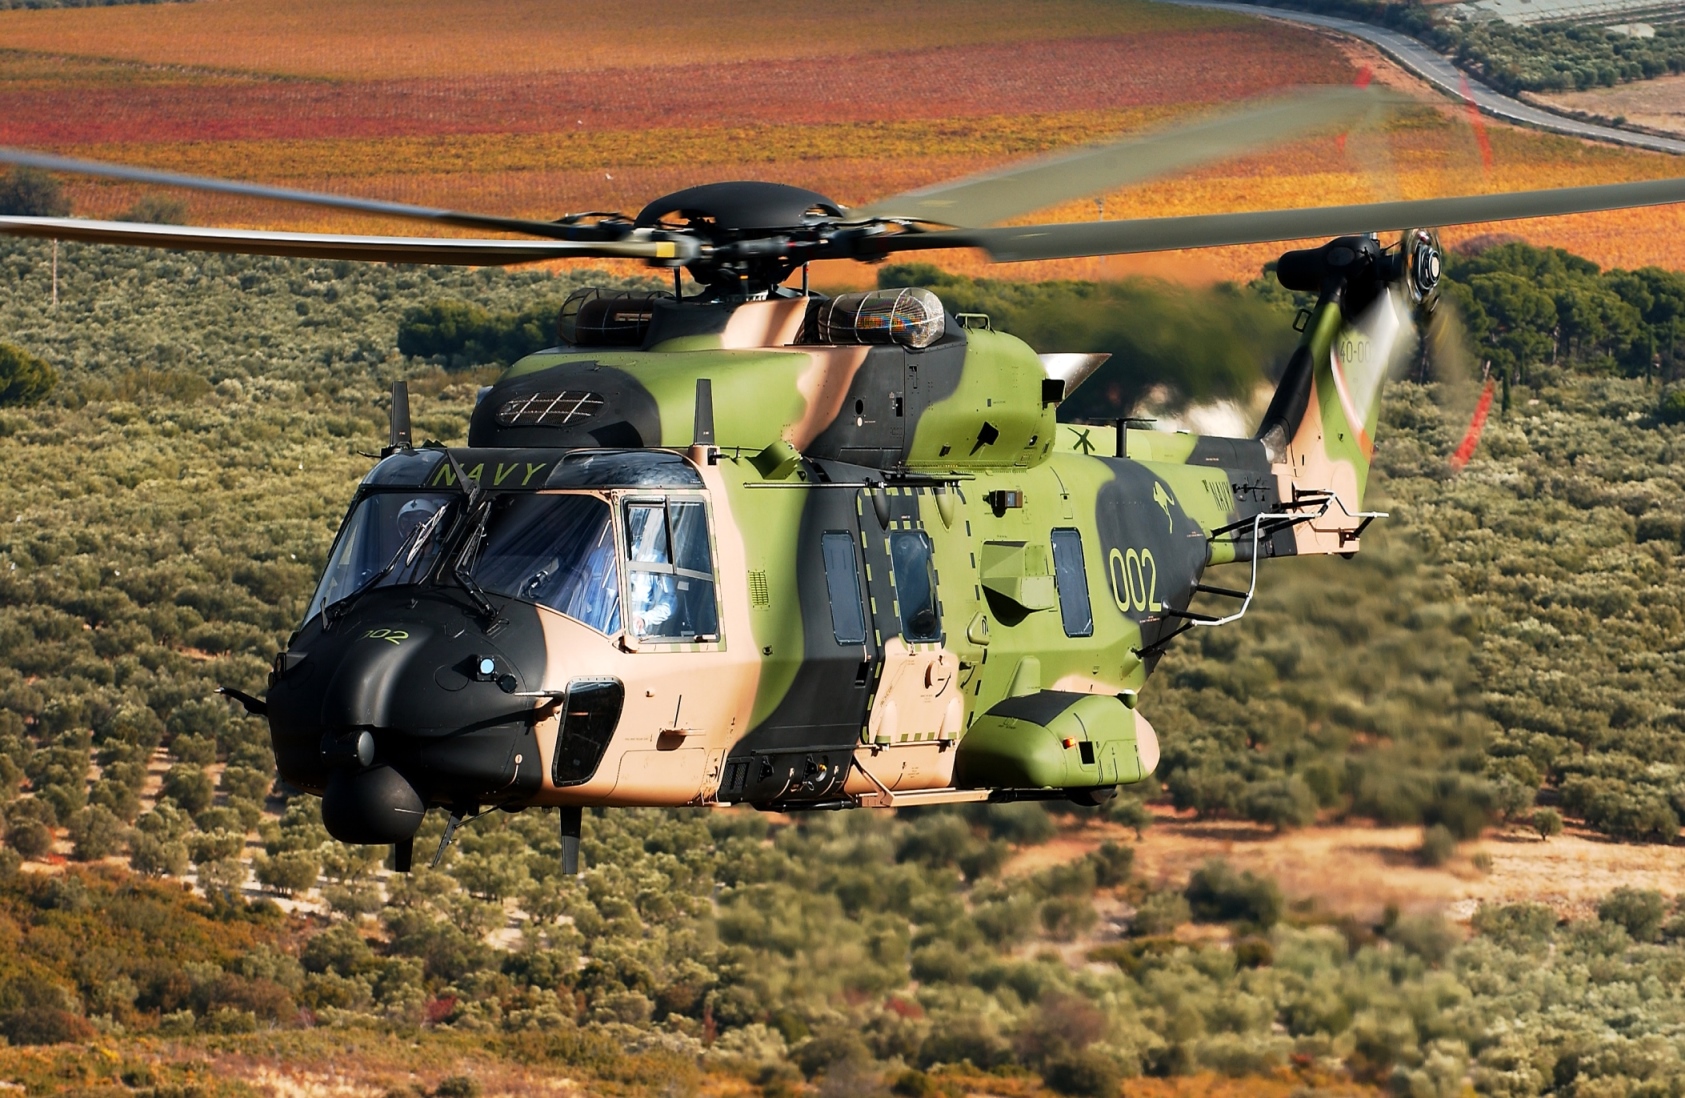 Leonardo and the Australian Ministry of Defence Sign Agreement to Establish Local Helicopter Transmission Repair and Overhaul Facility